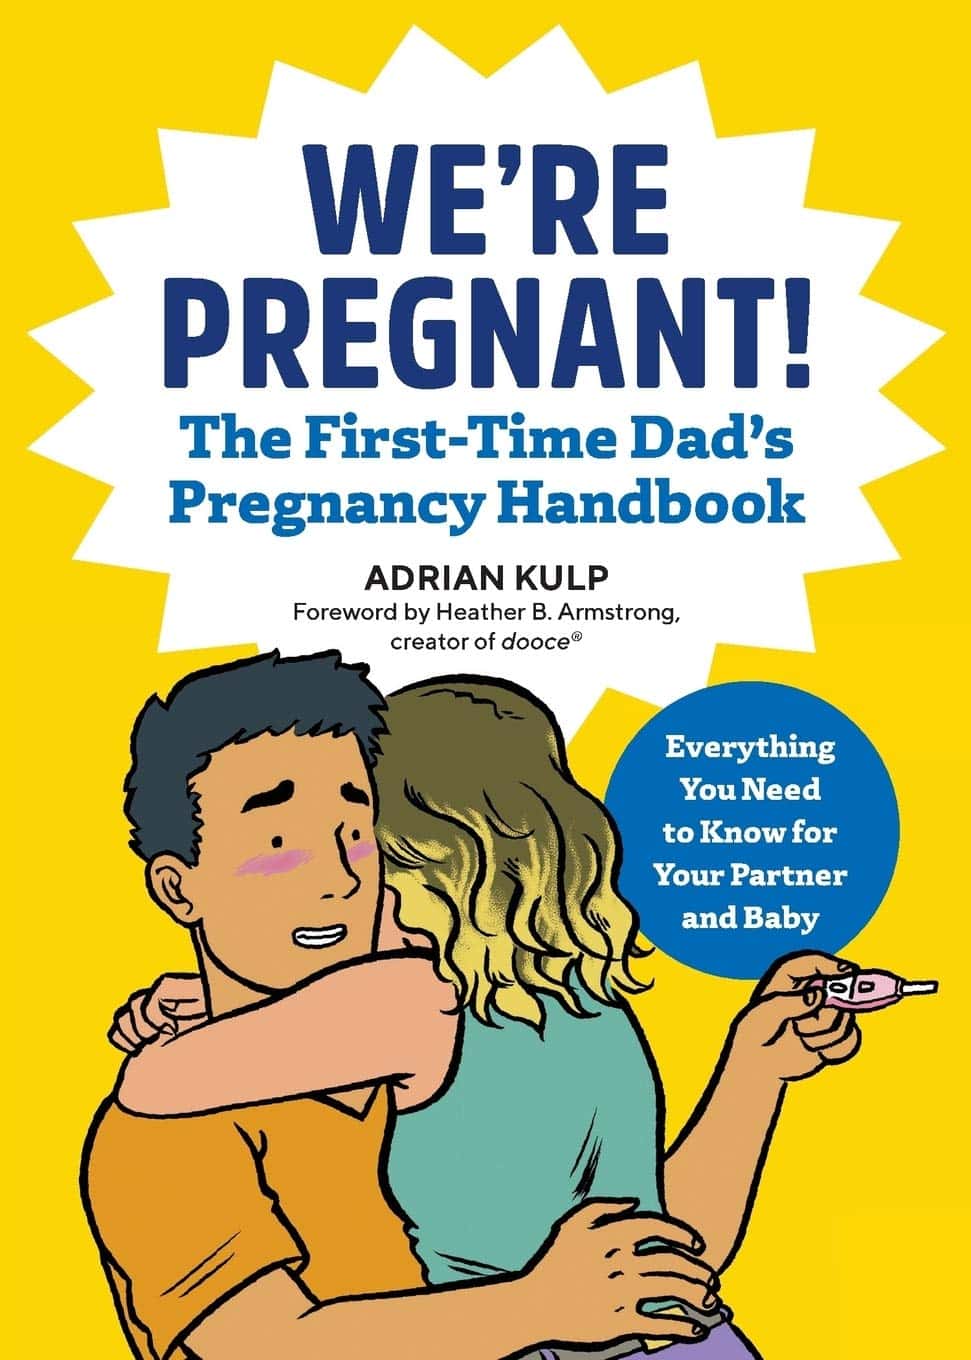 25 Fun Ways to Tell Your Partner You are Pregnant